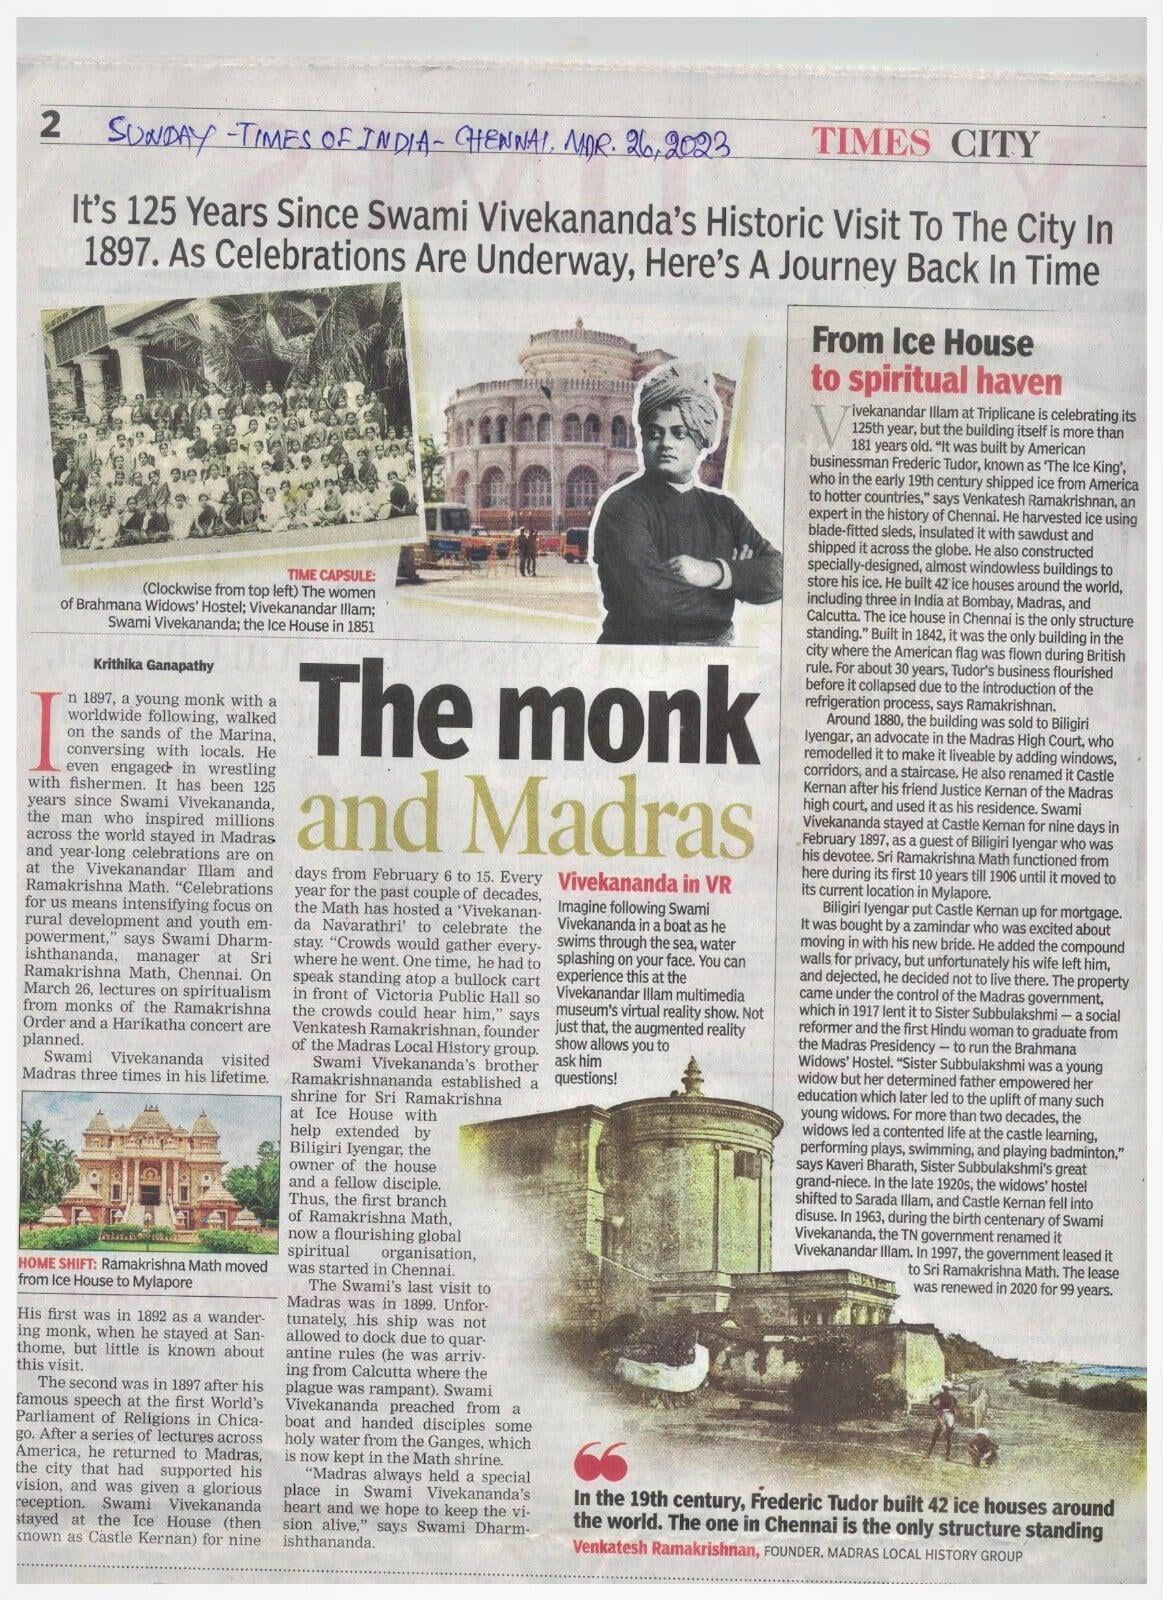 The Monk and Madras - The Times of India Report